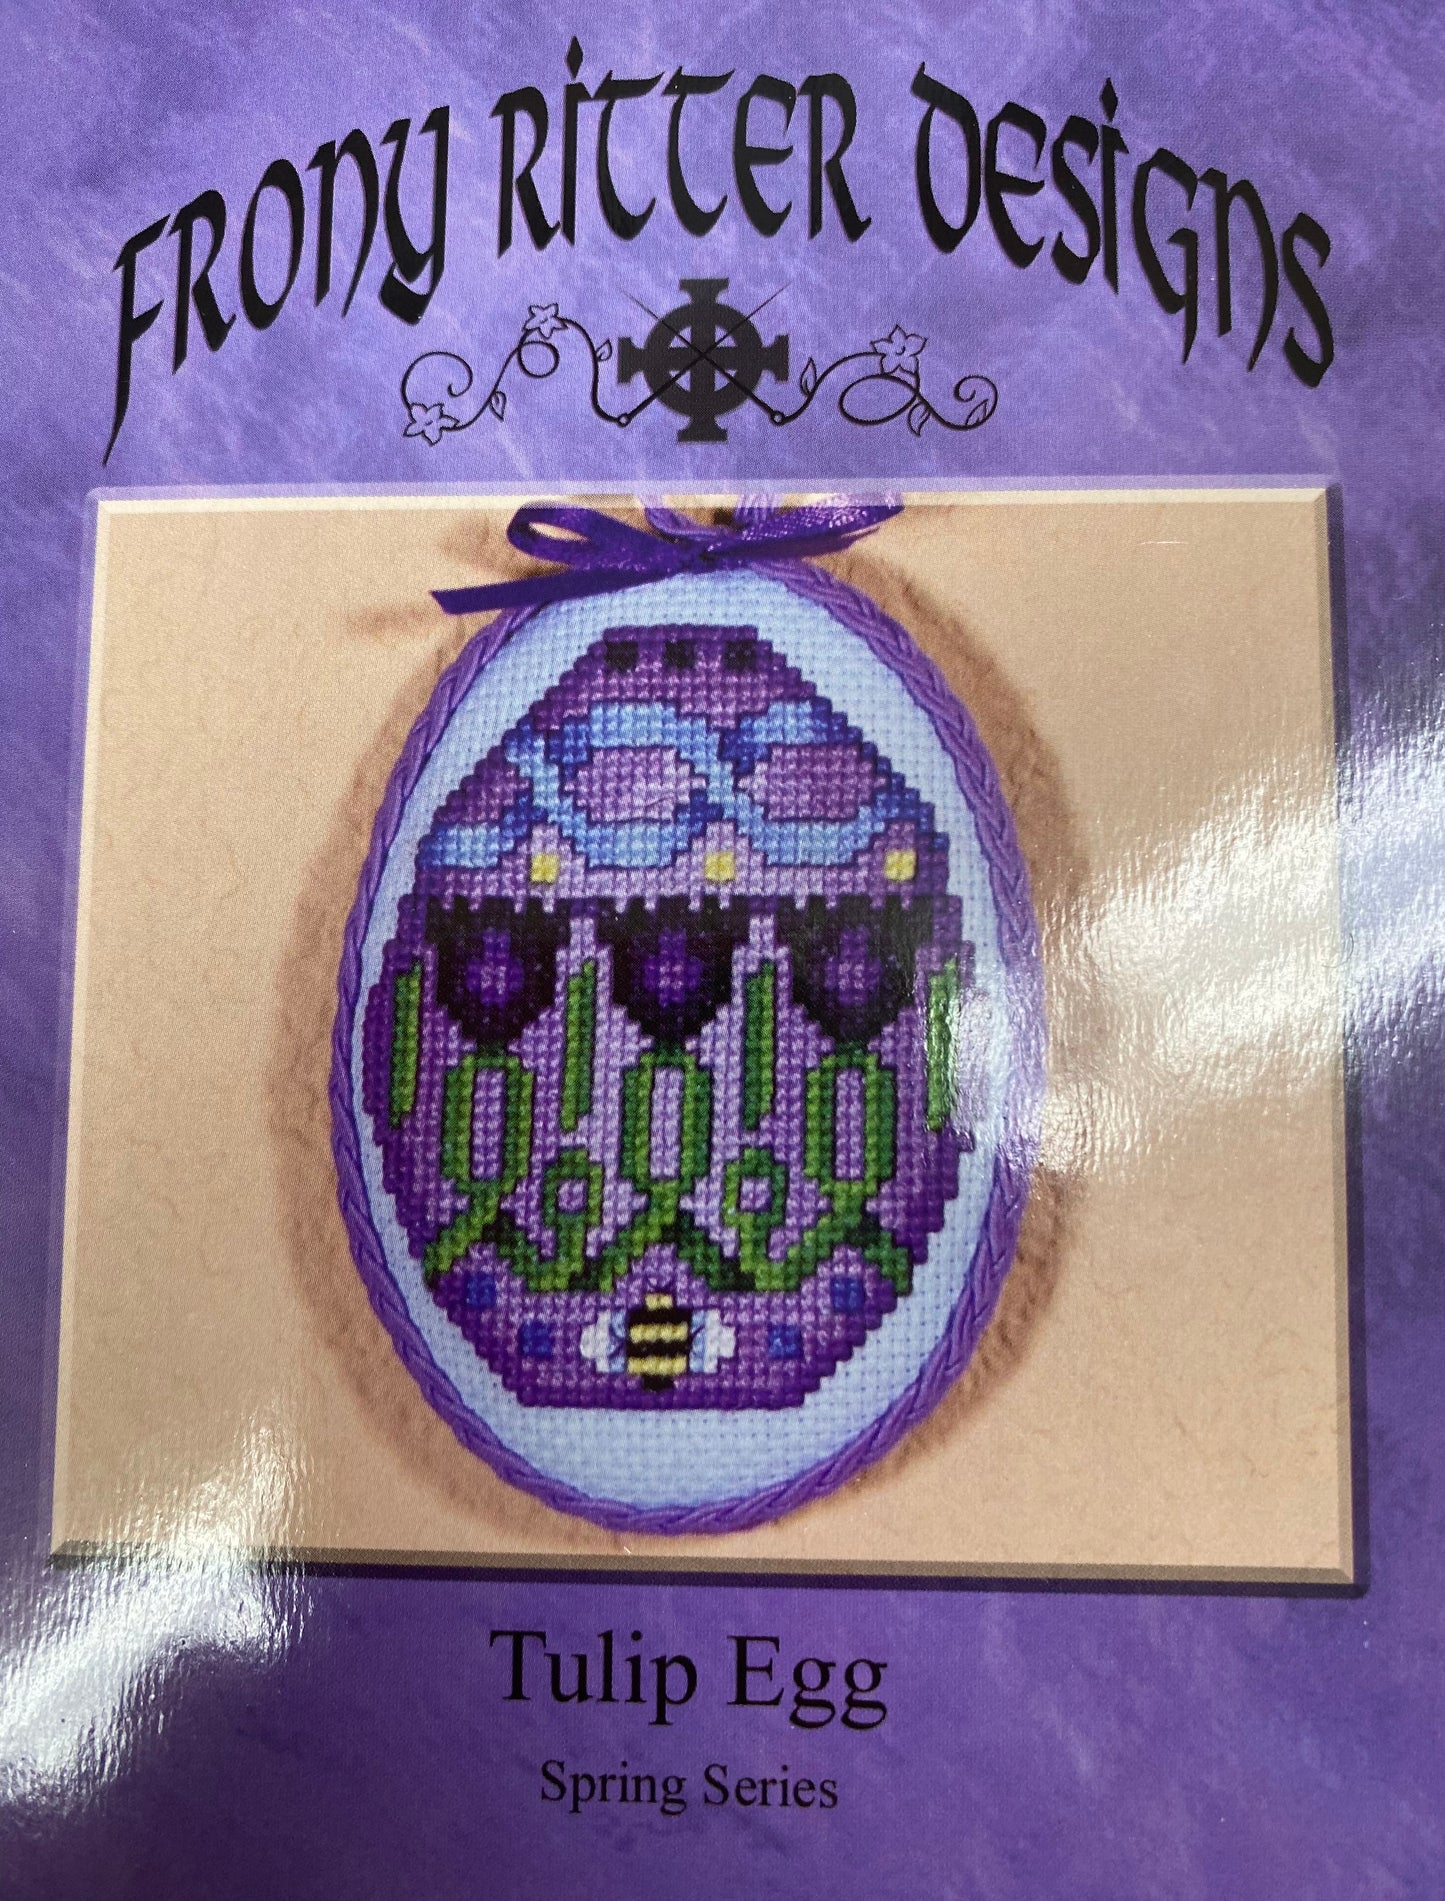 Tulip Egg by Frony Ritter Designs